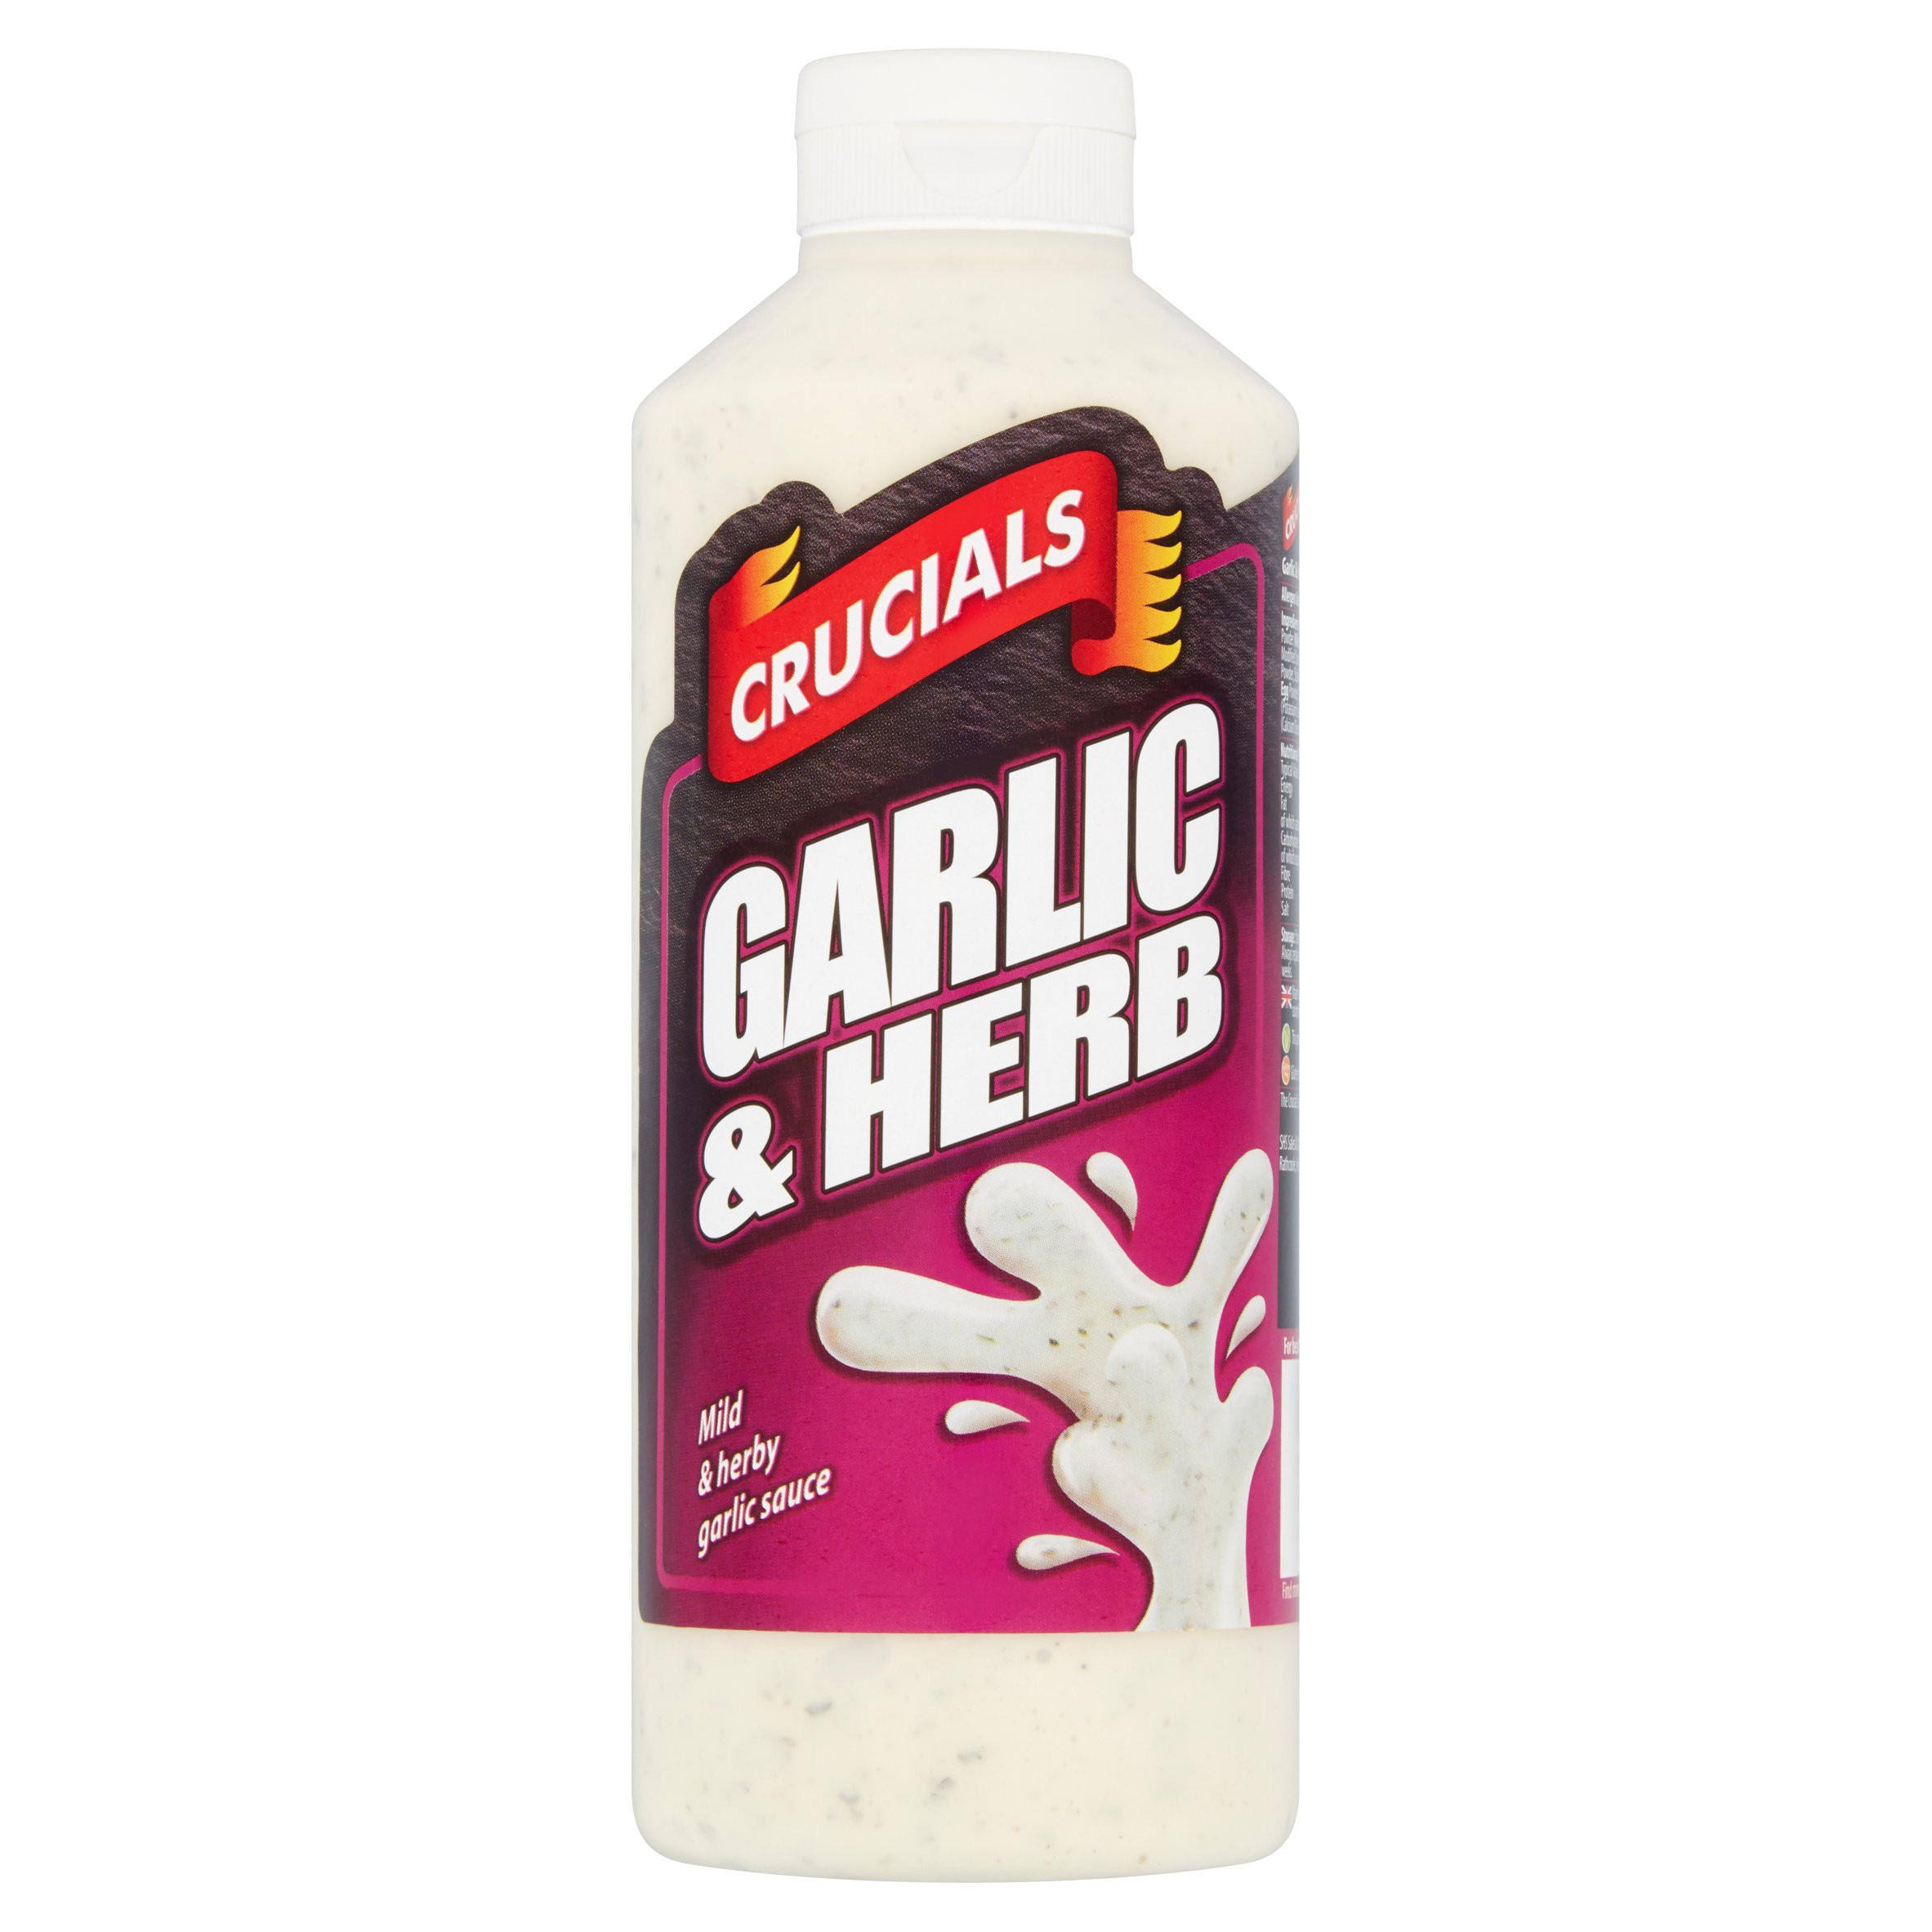 Crucials Garlic and Herb Mayo Delivered to USA